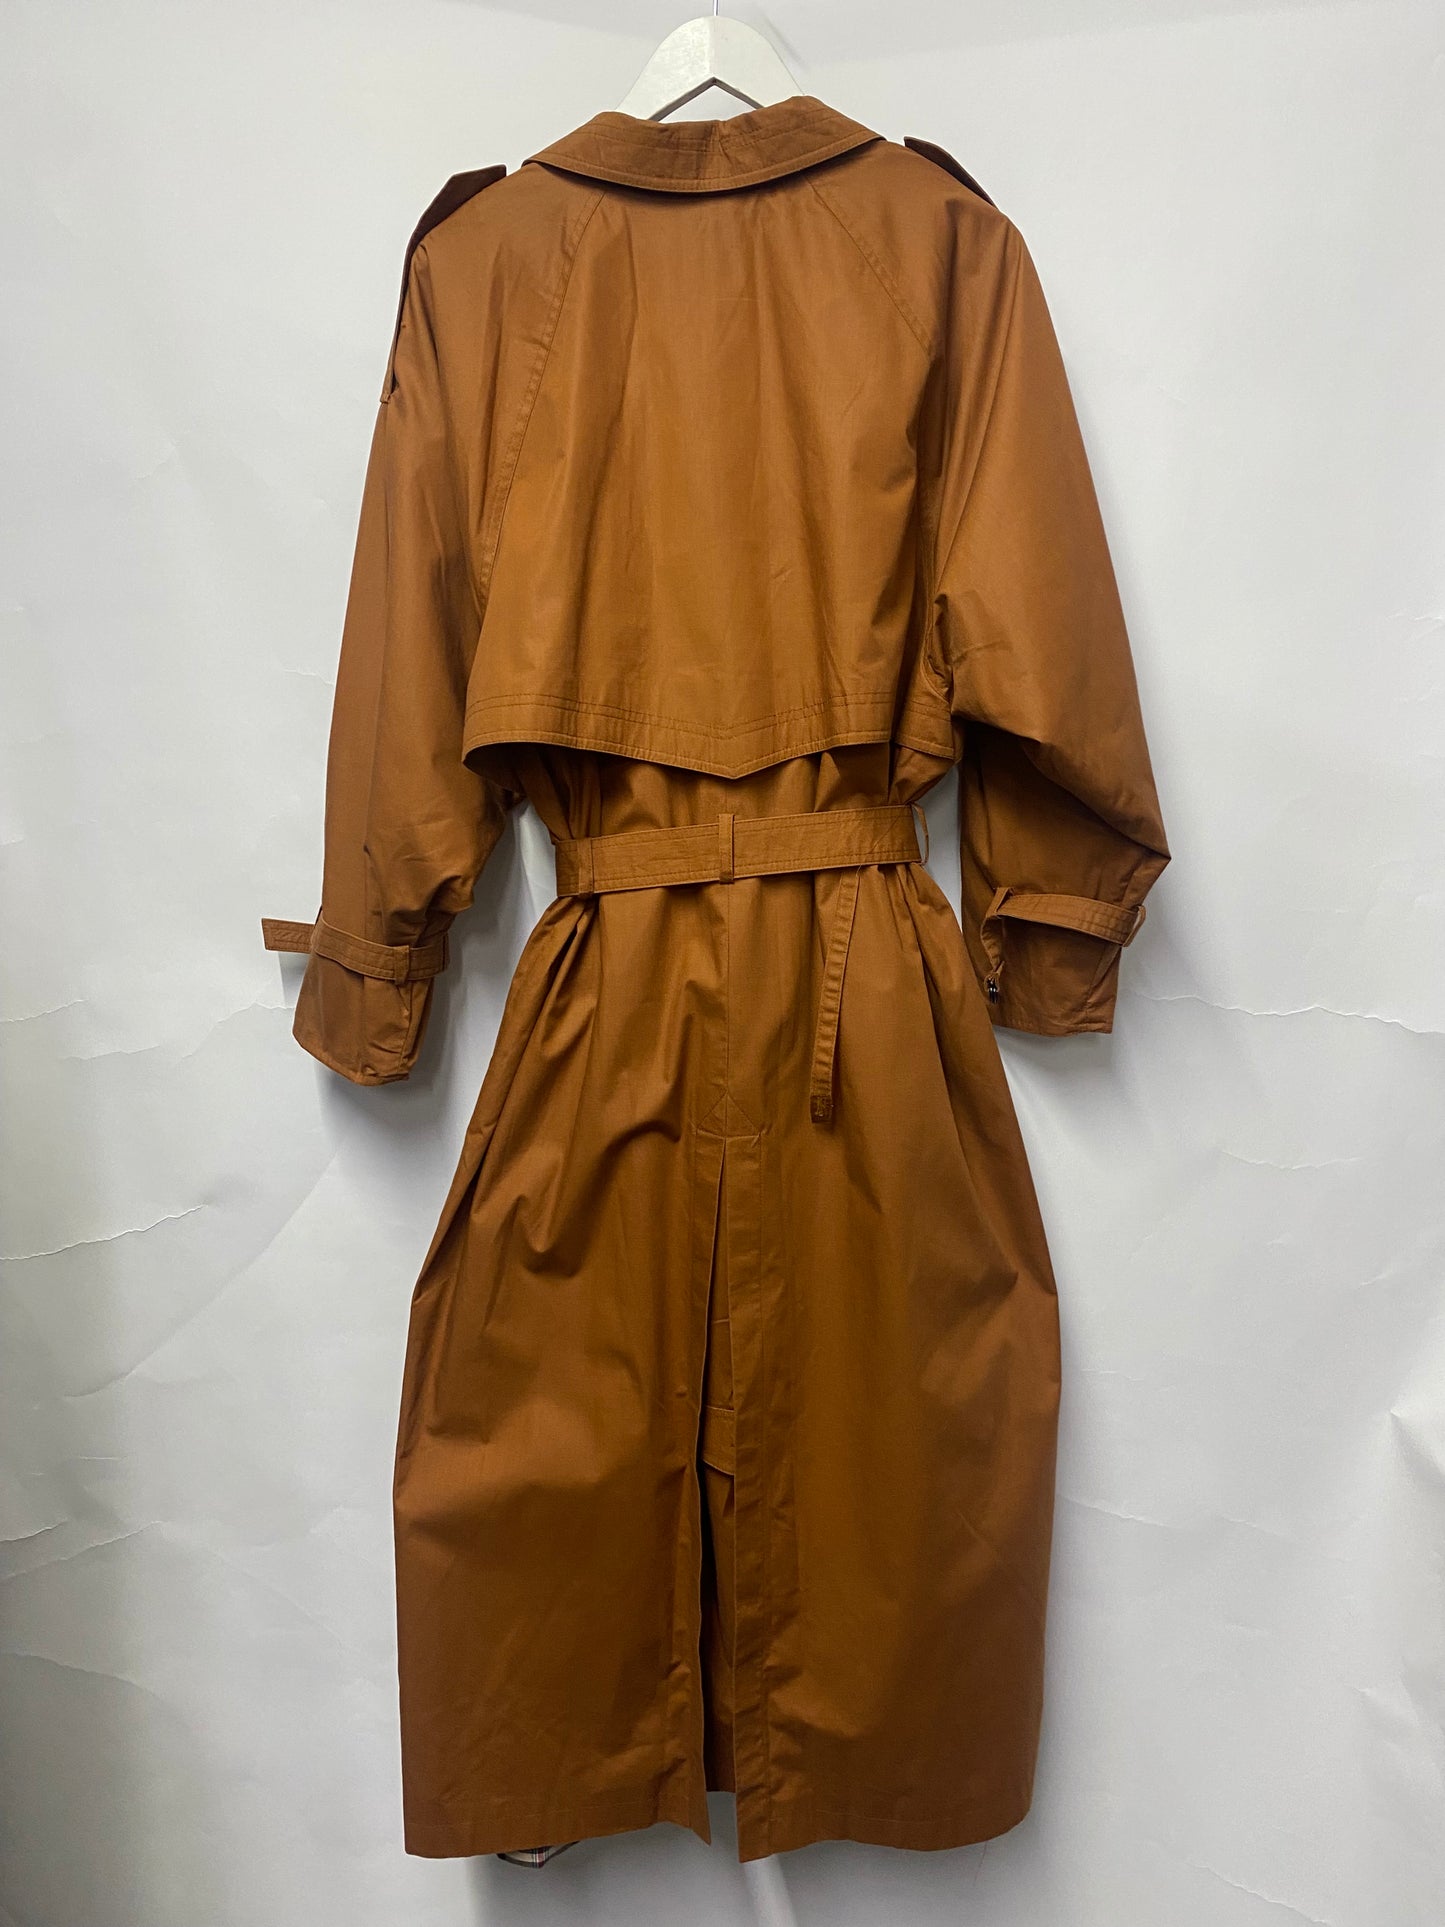 Pierre D'alby Vintage Brown Cotton Blend Double Breasted Trench Coat Large